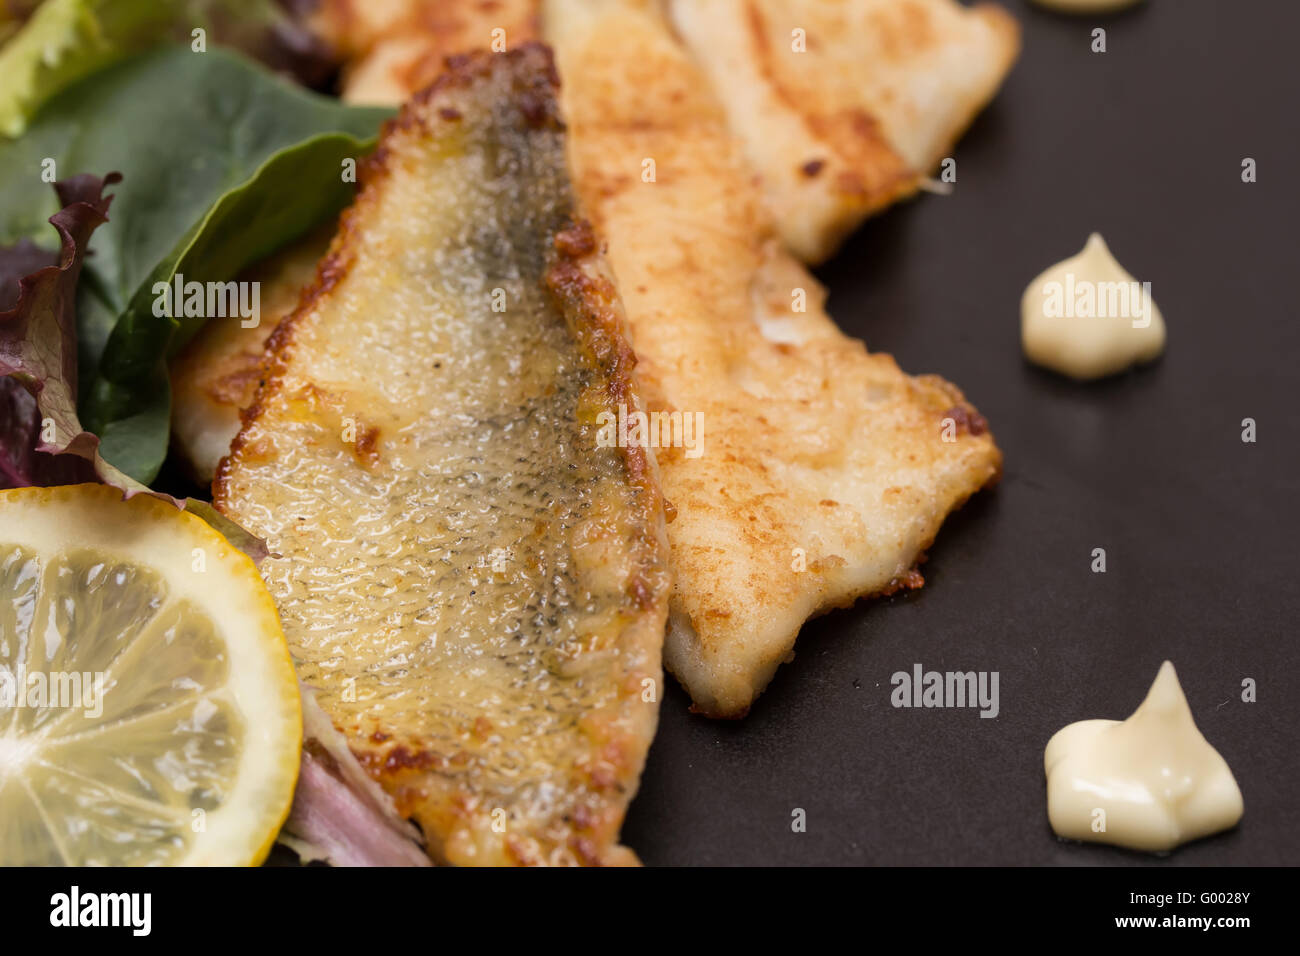 Fried perch filets with potatoes Stock Photo